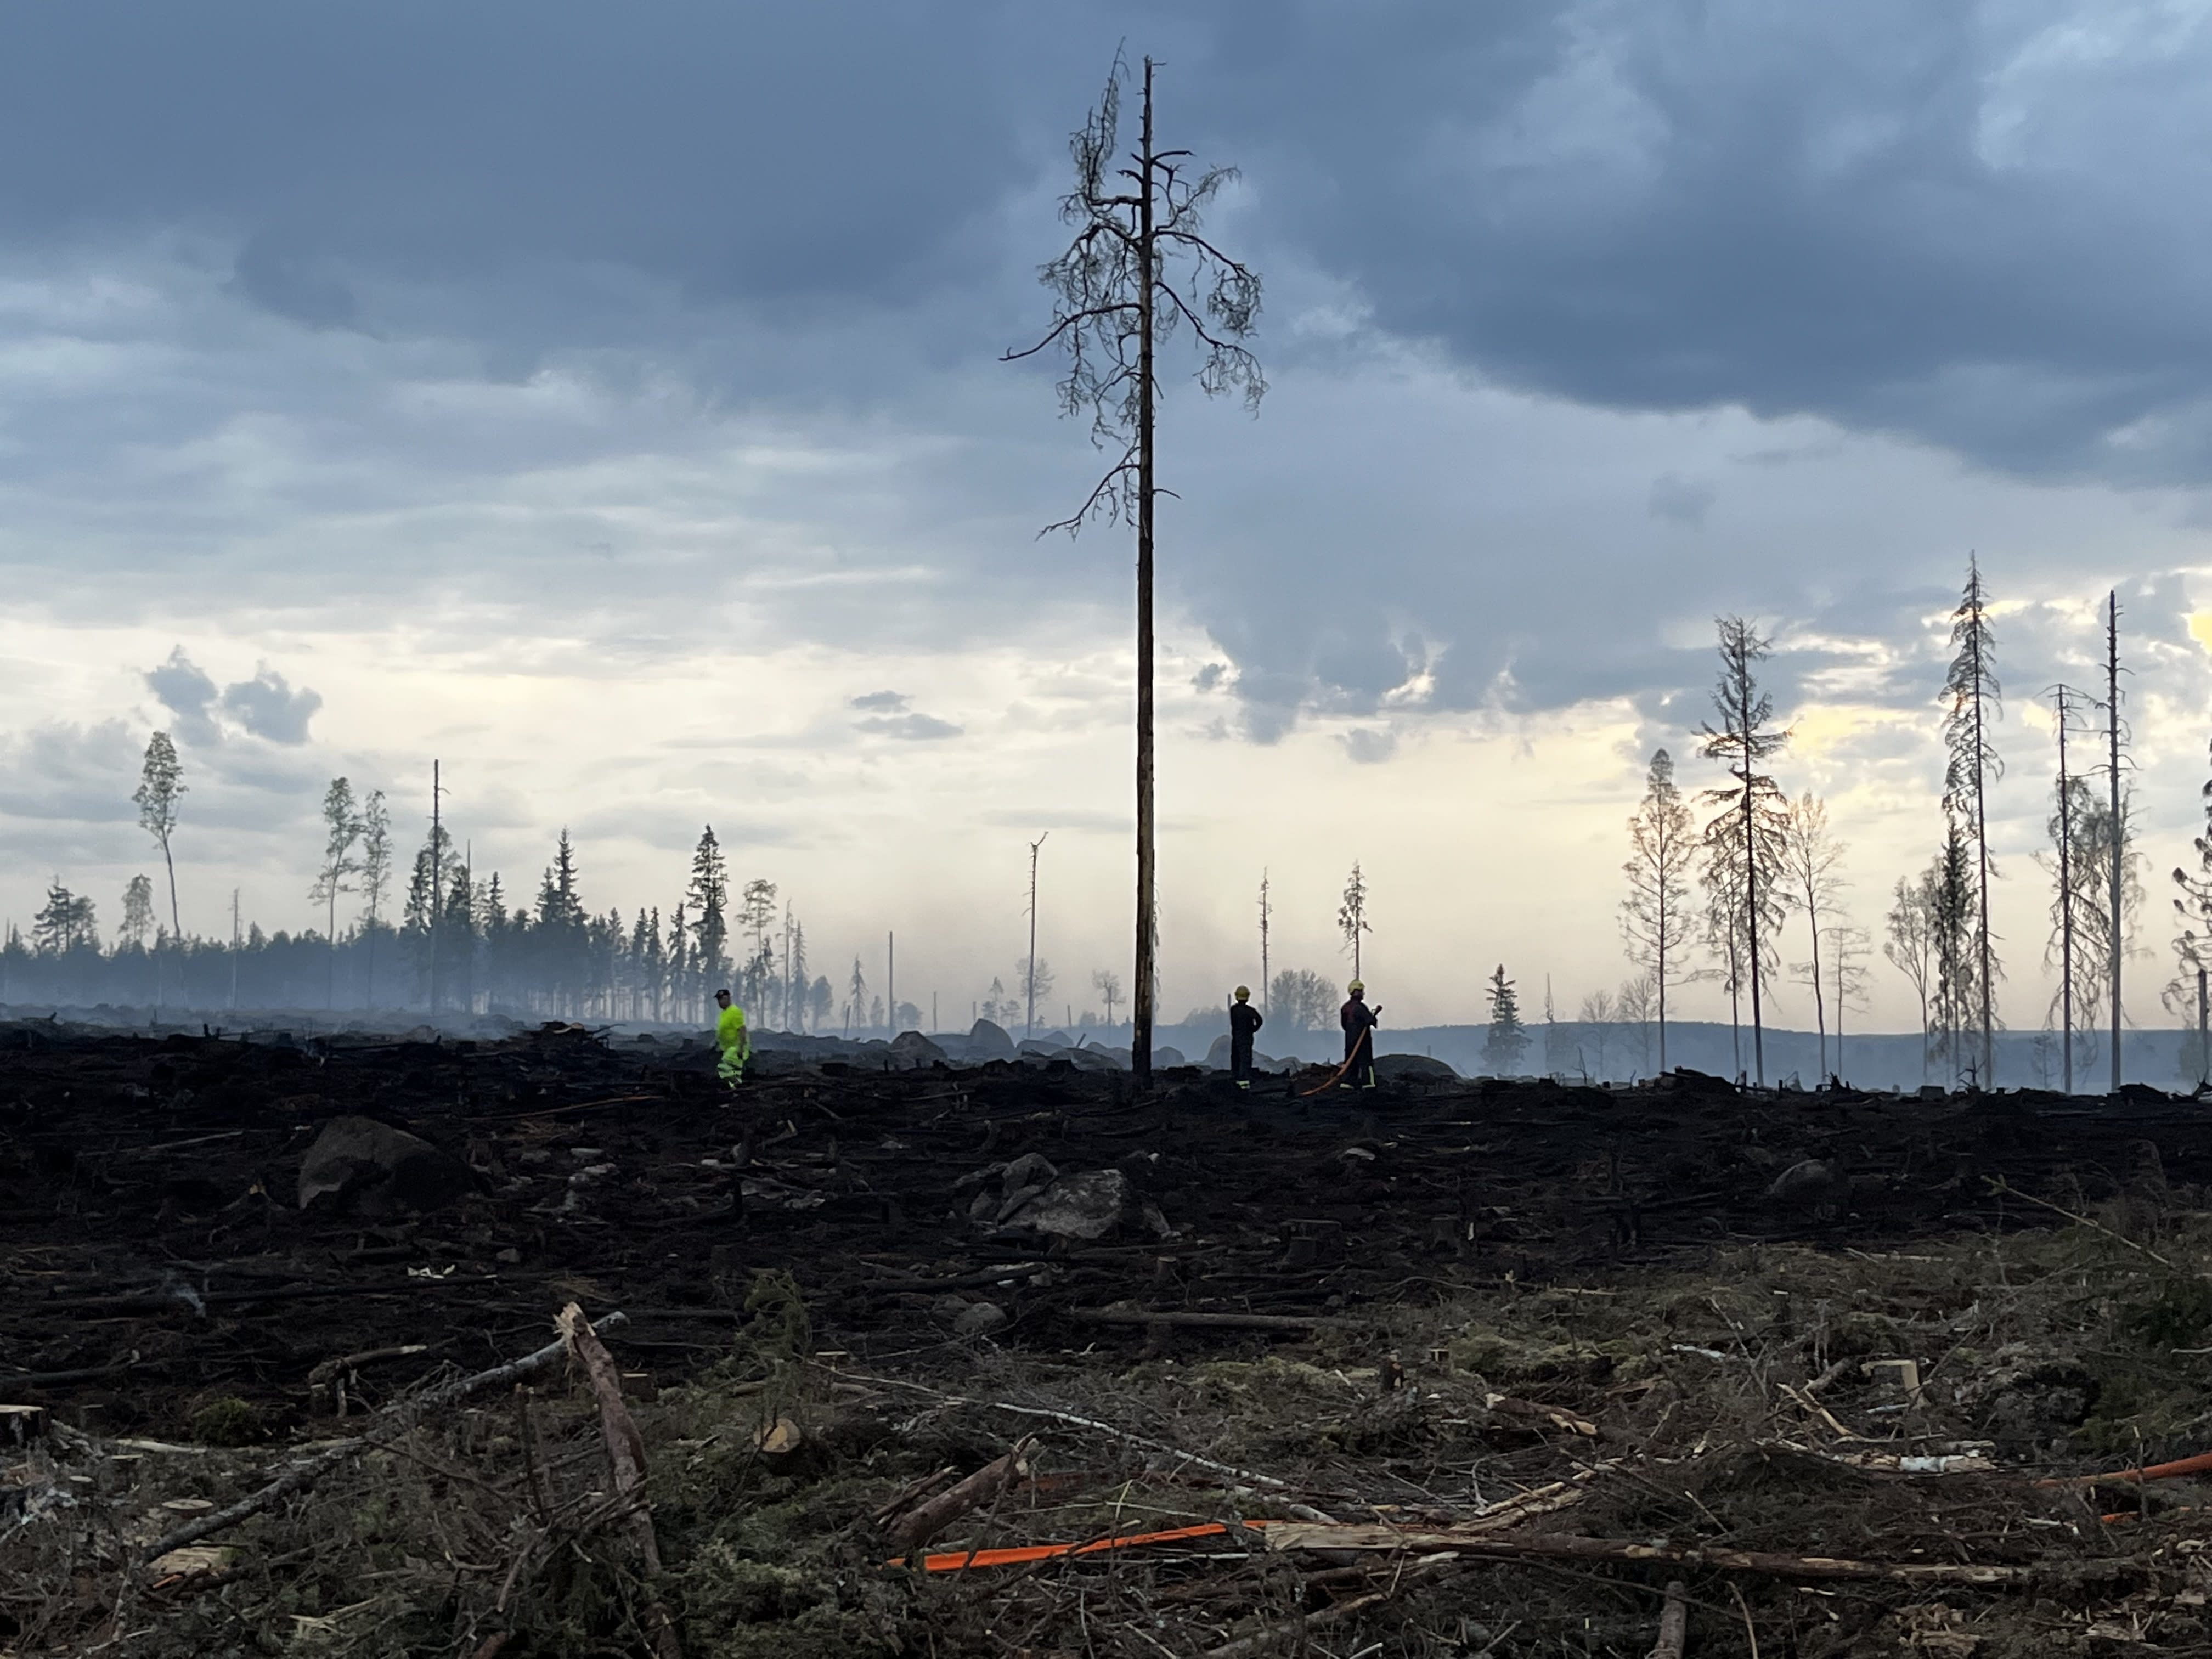 The Fire and Rescue Service extinguishes wildfires in various parts of Finland this weekend, the Meteorological Department extends fire warnings